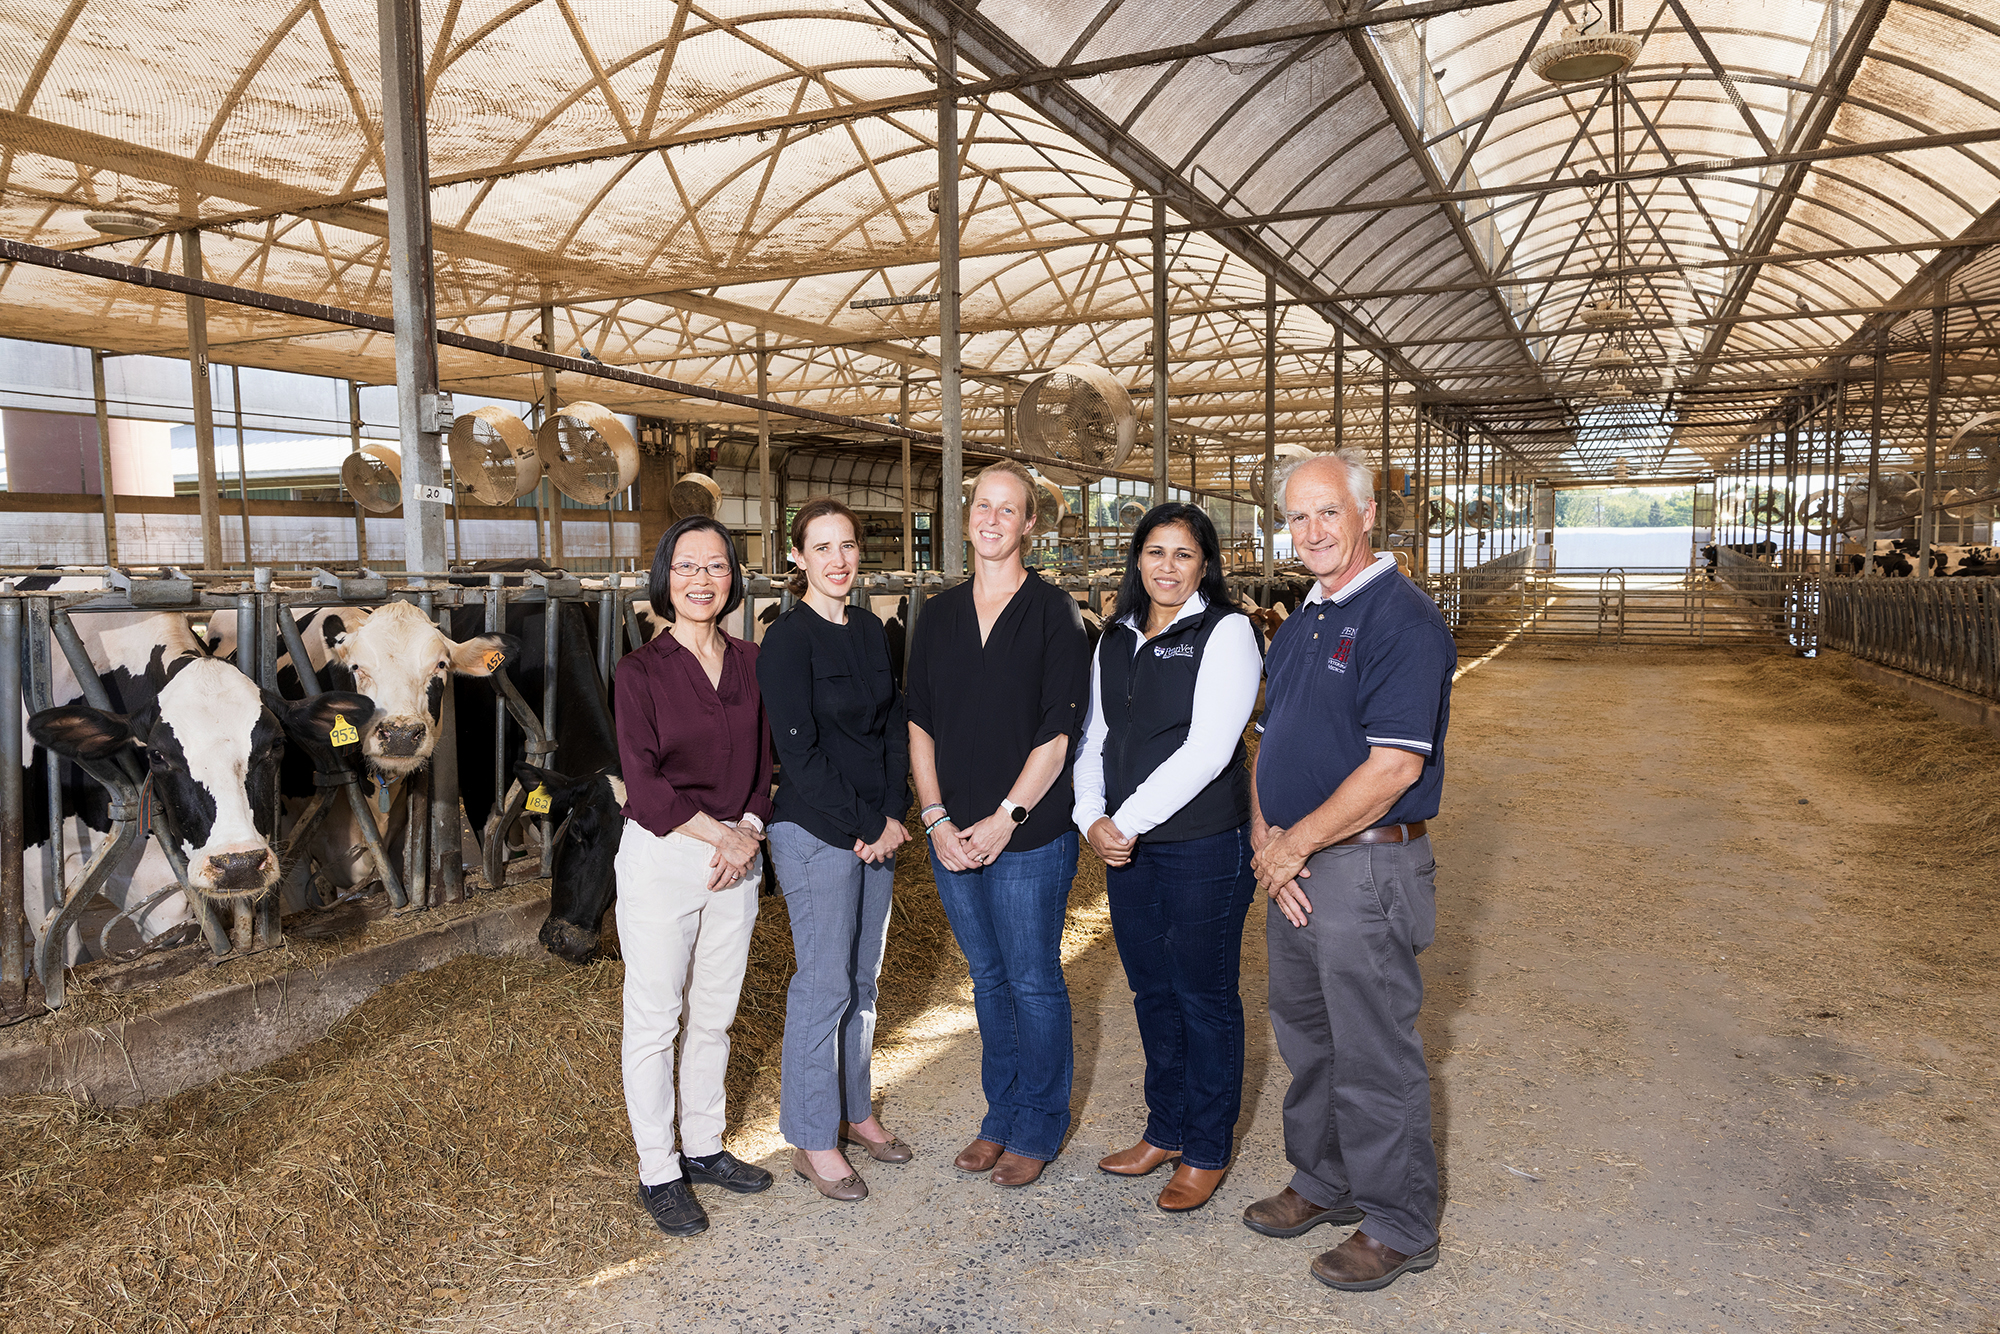 Five members of CSAFS standing in a stable with cows.